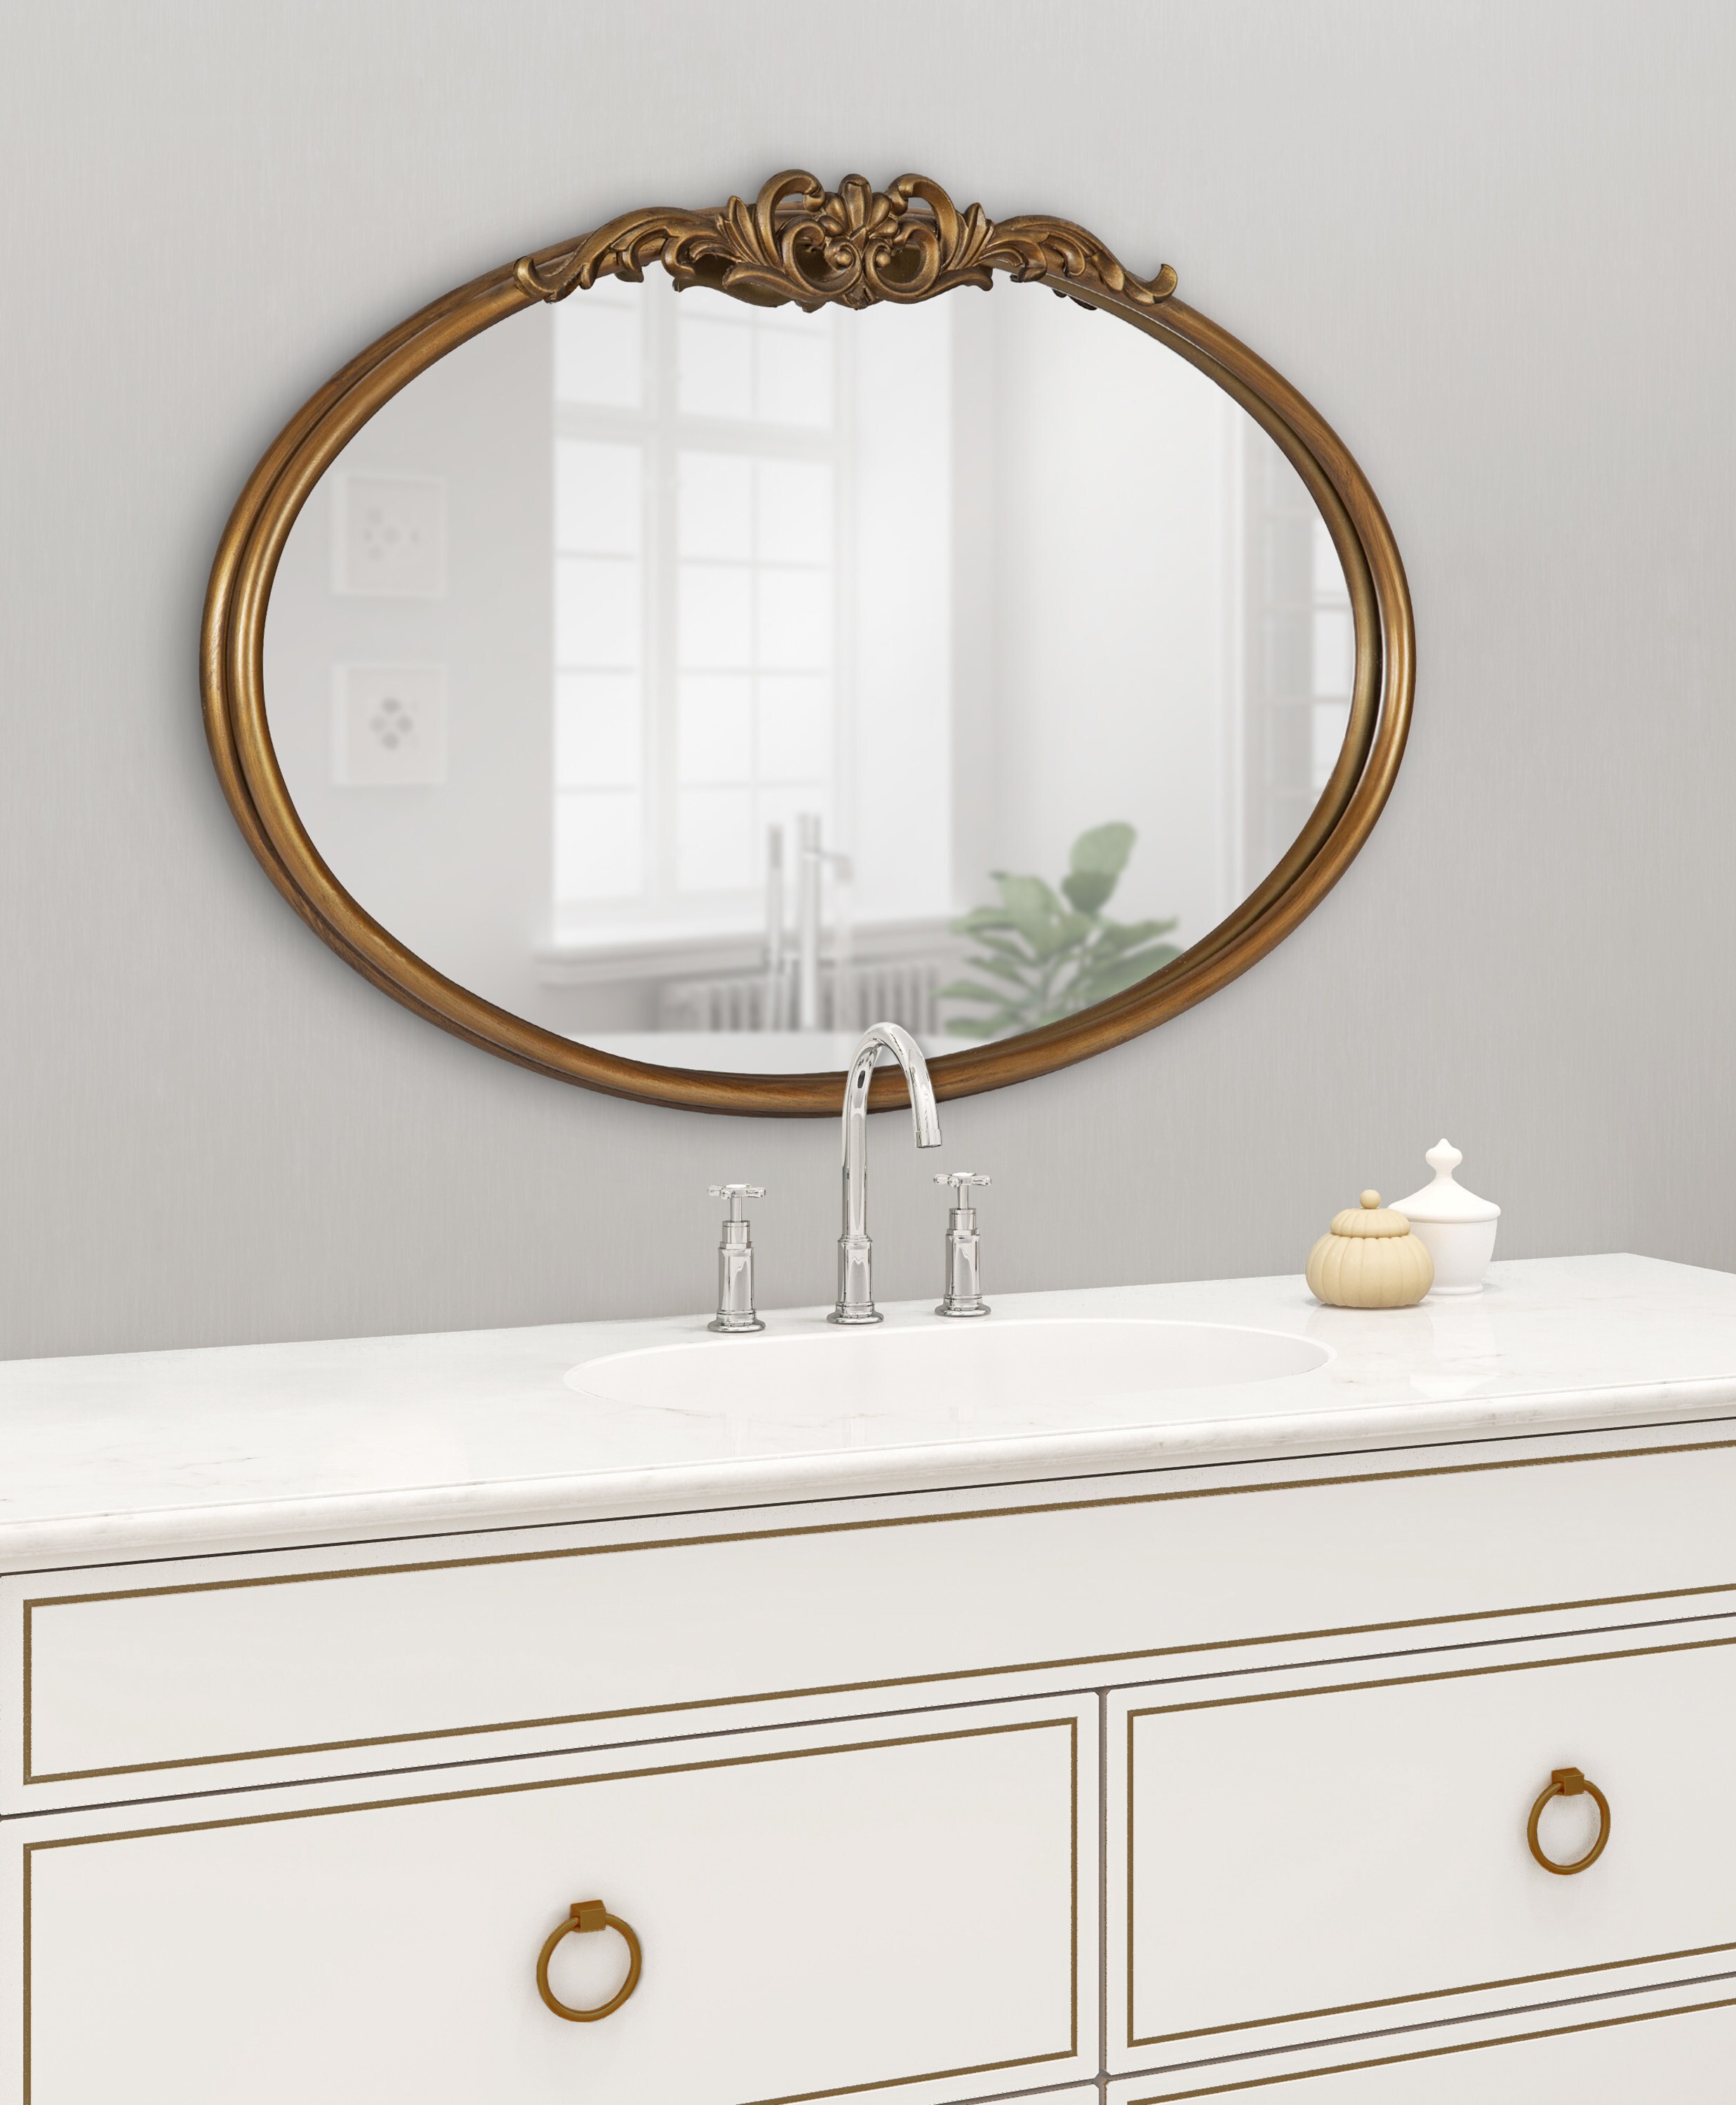 Kate and Laurel Arendahl 27.25-in W x 18.75-in H Oval Gold Framed Wall Mirror